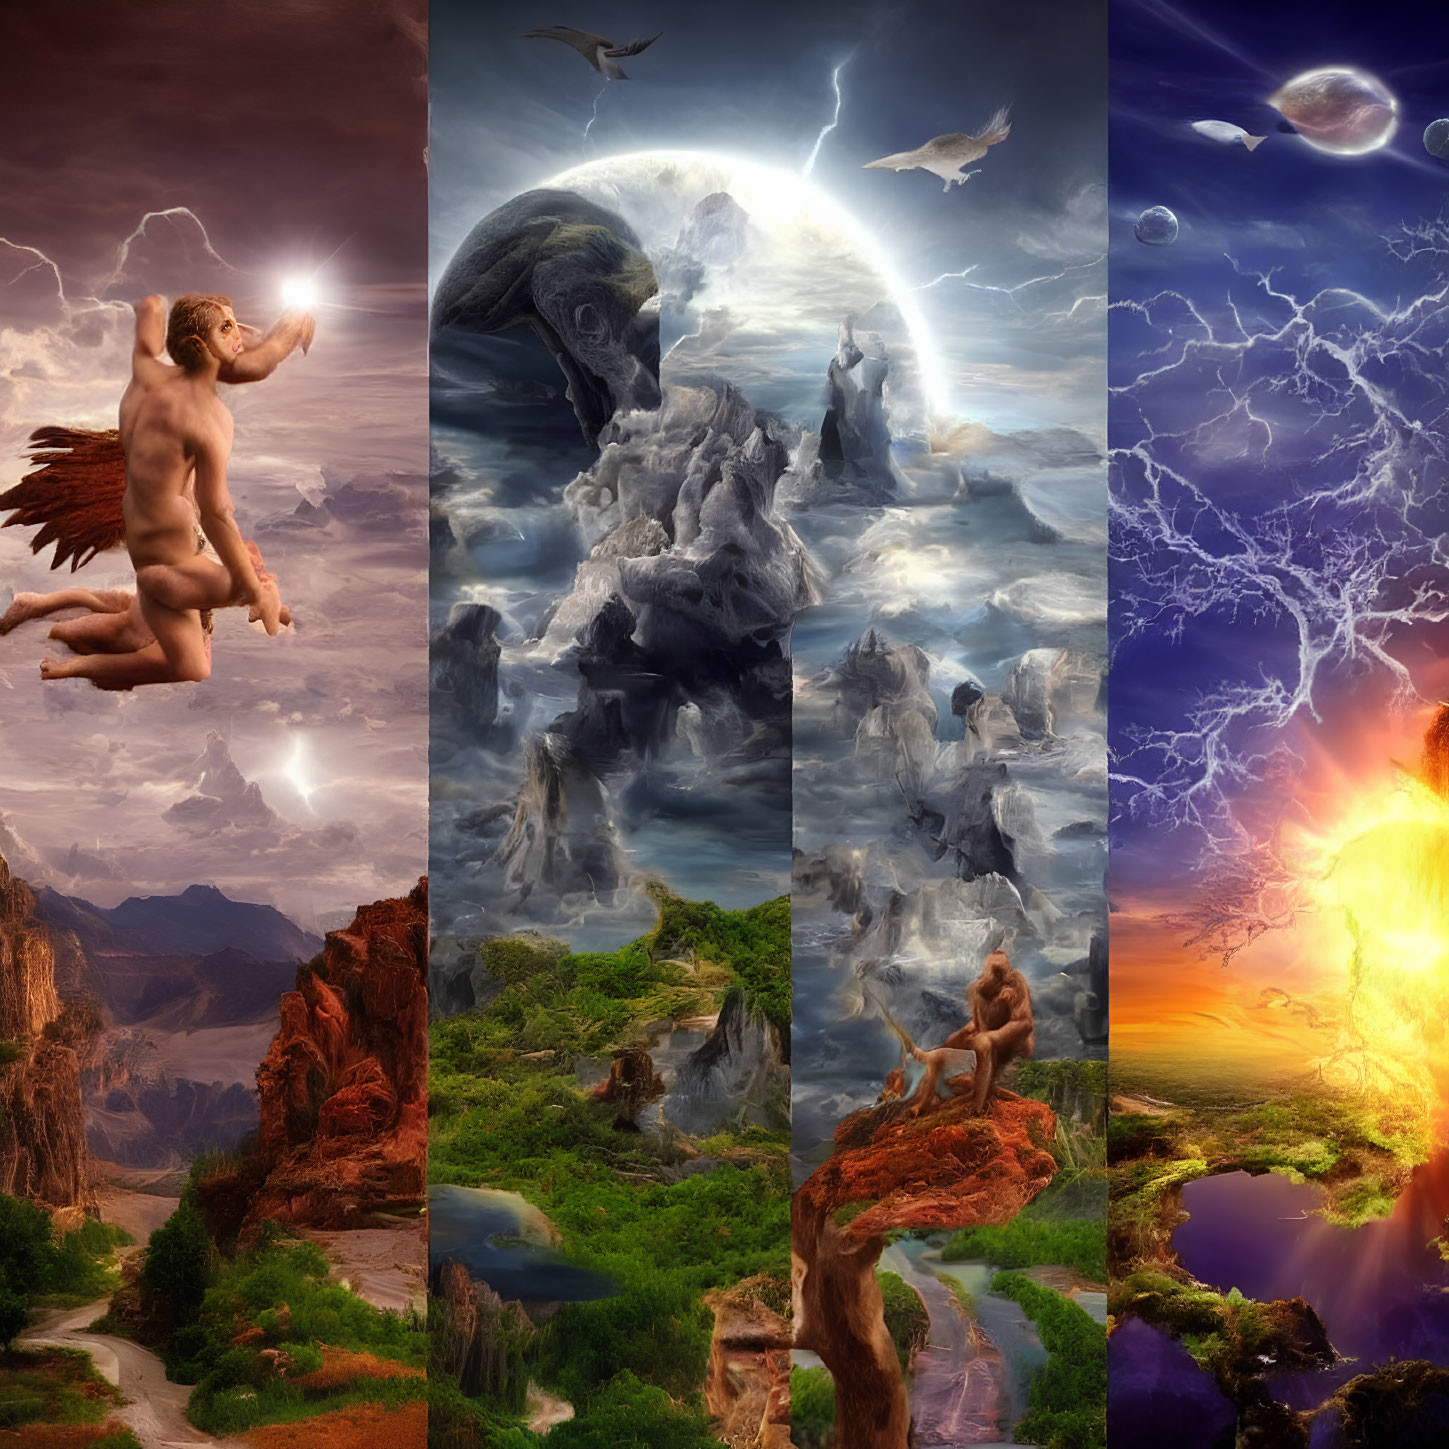 Fantasy Triptych Featuring Icarus, Surreal Landscapes, and Mythical Creatures